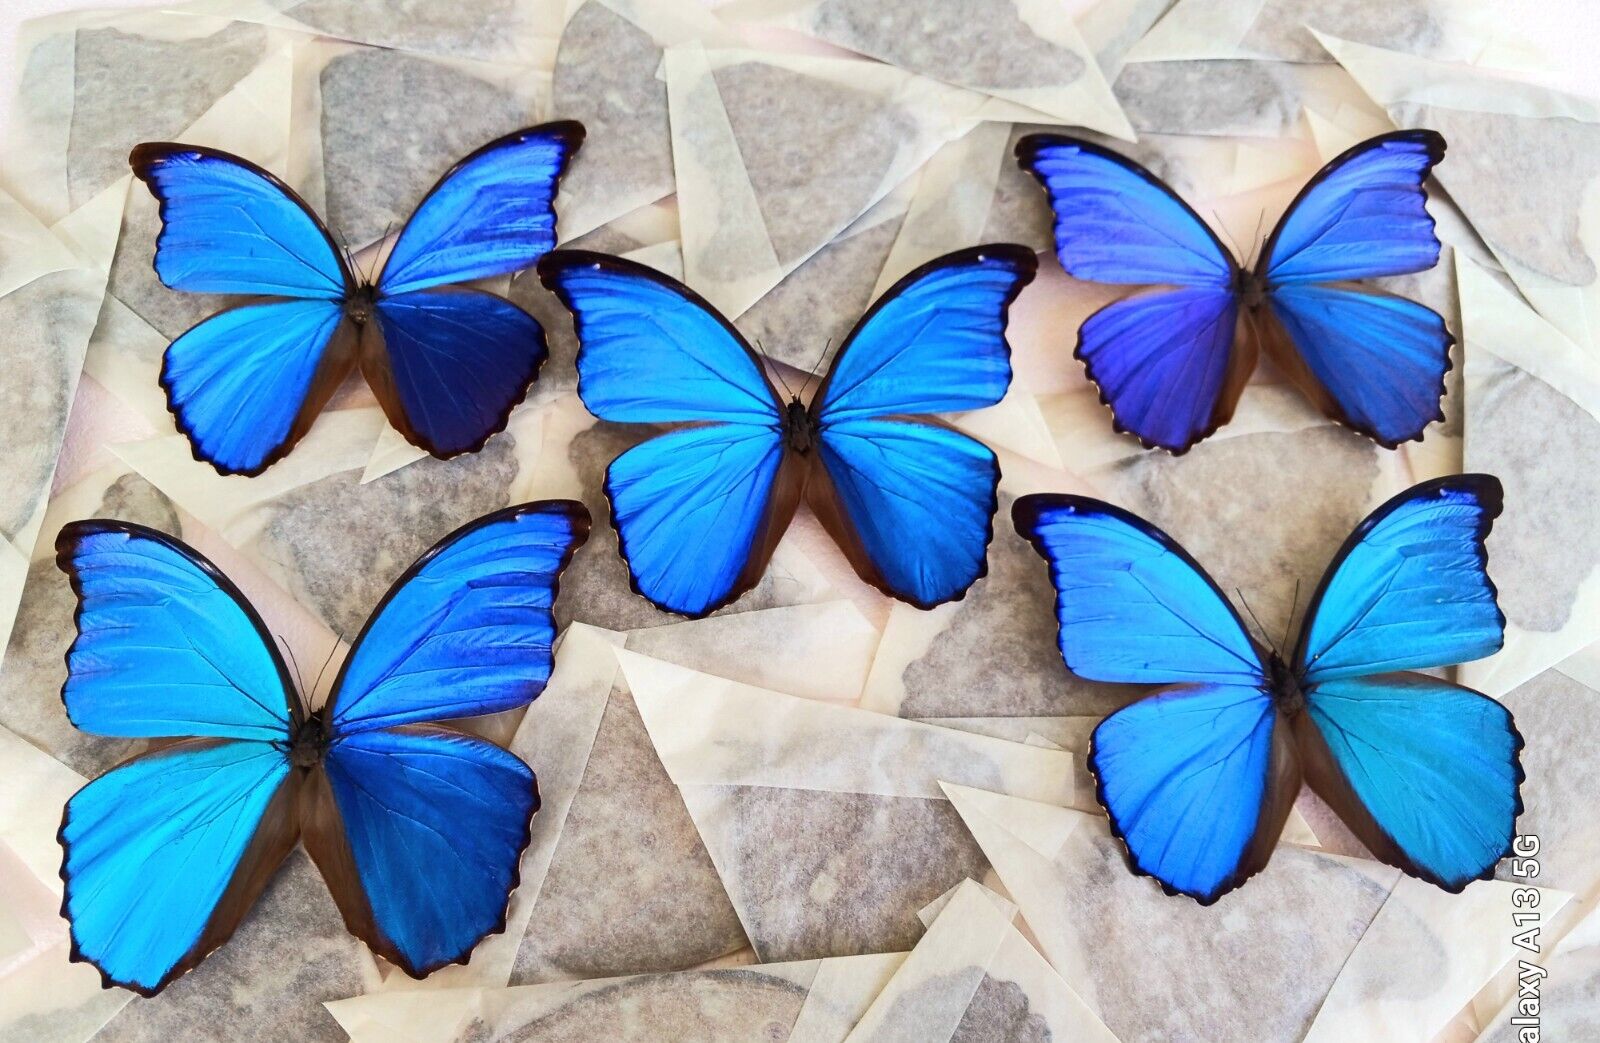 LOT OF 10 BLUE MORPHO DIDIUS A2 CRAFT GRADE FOR JEWELRY ART STUDY WINGS CLOSED.